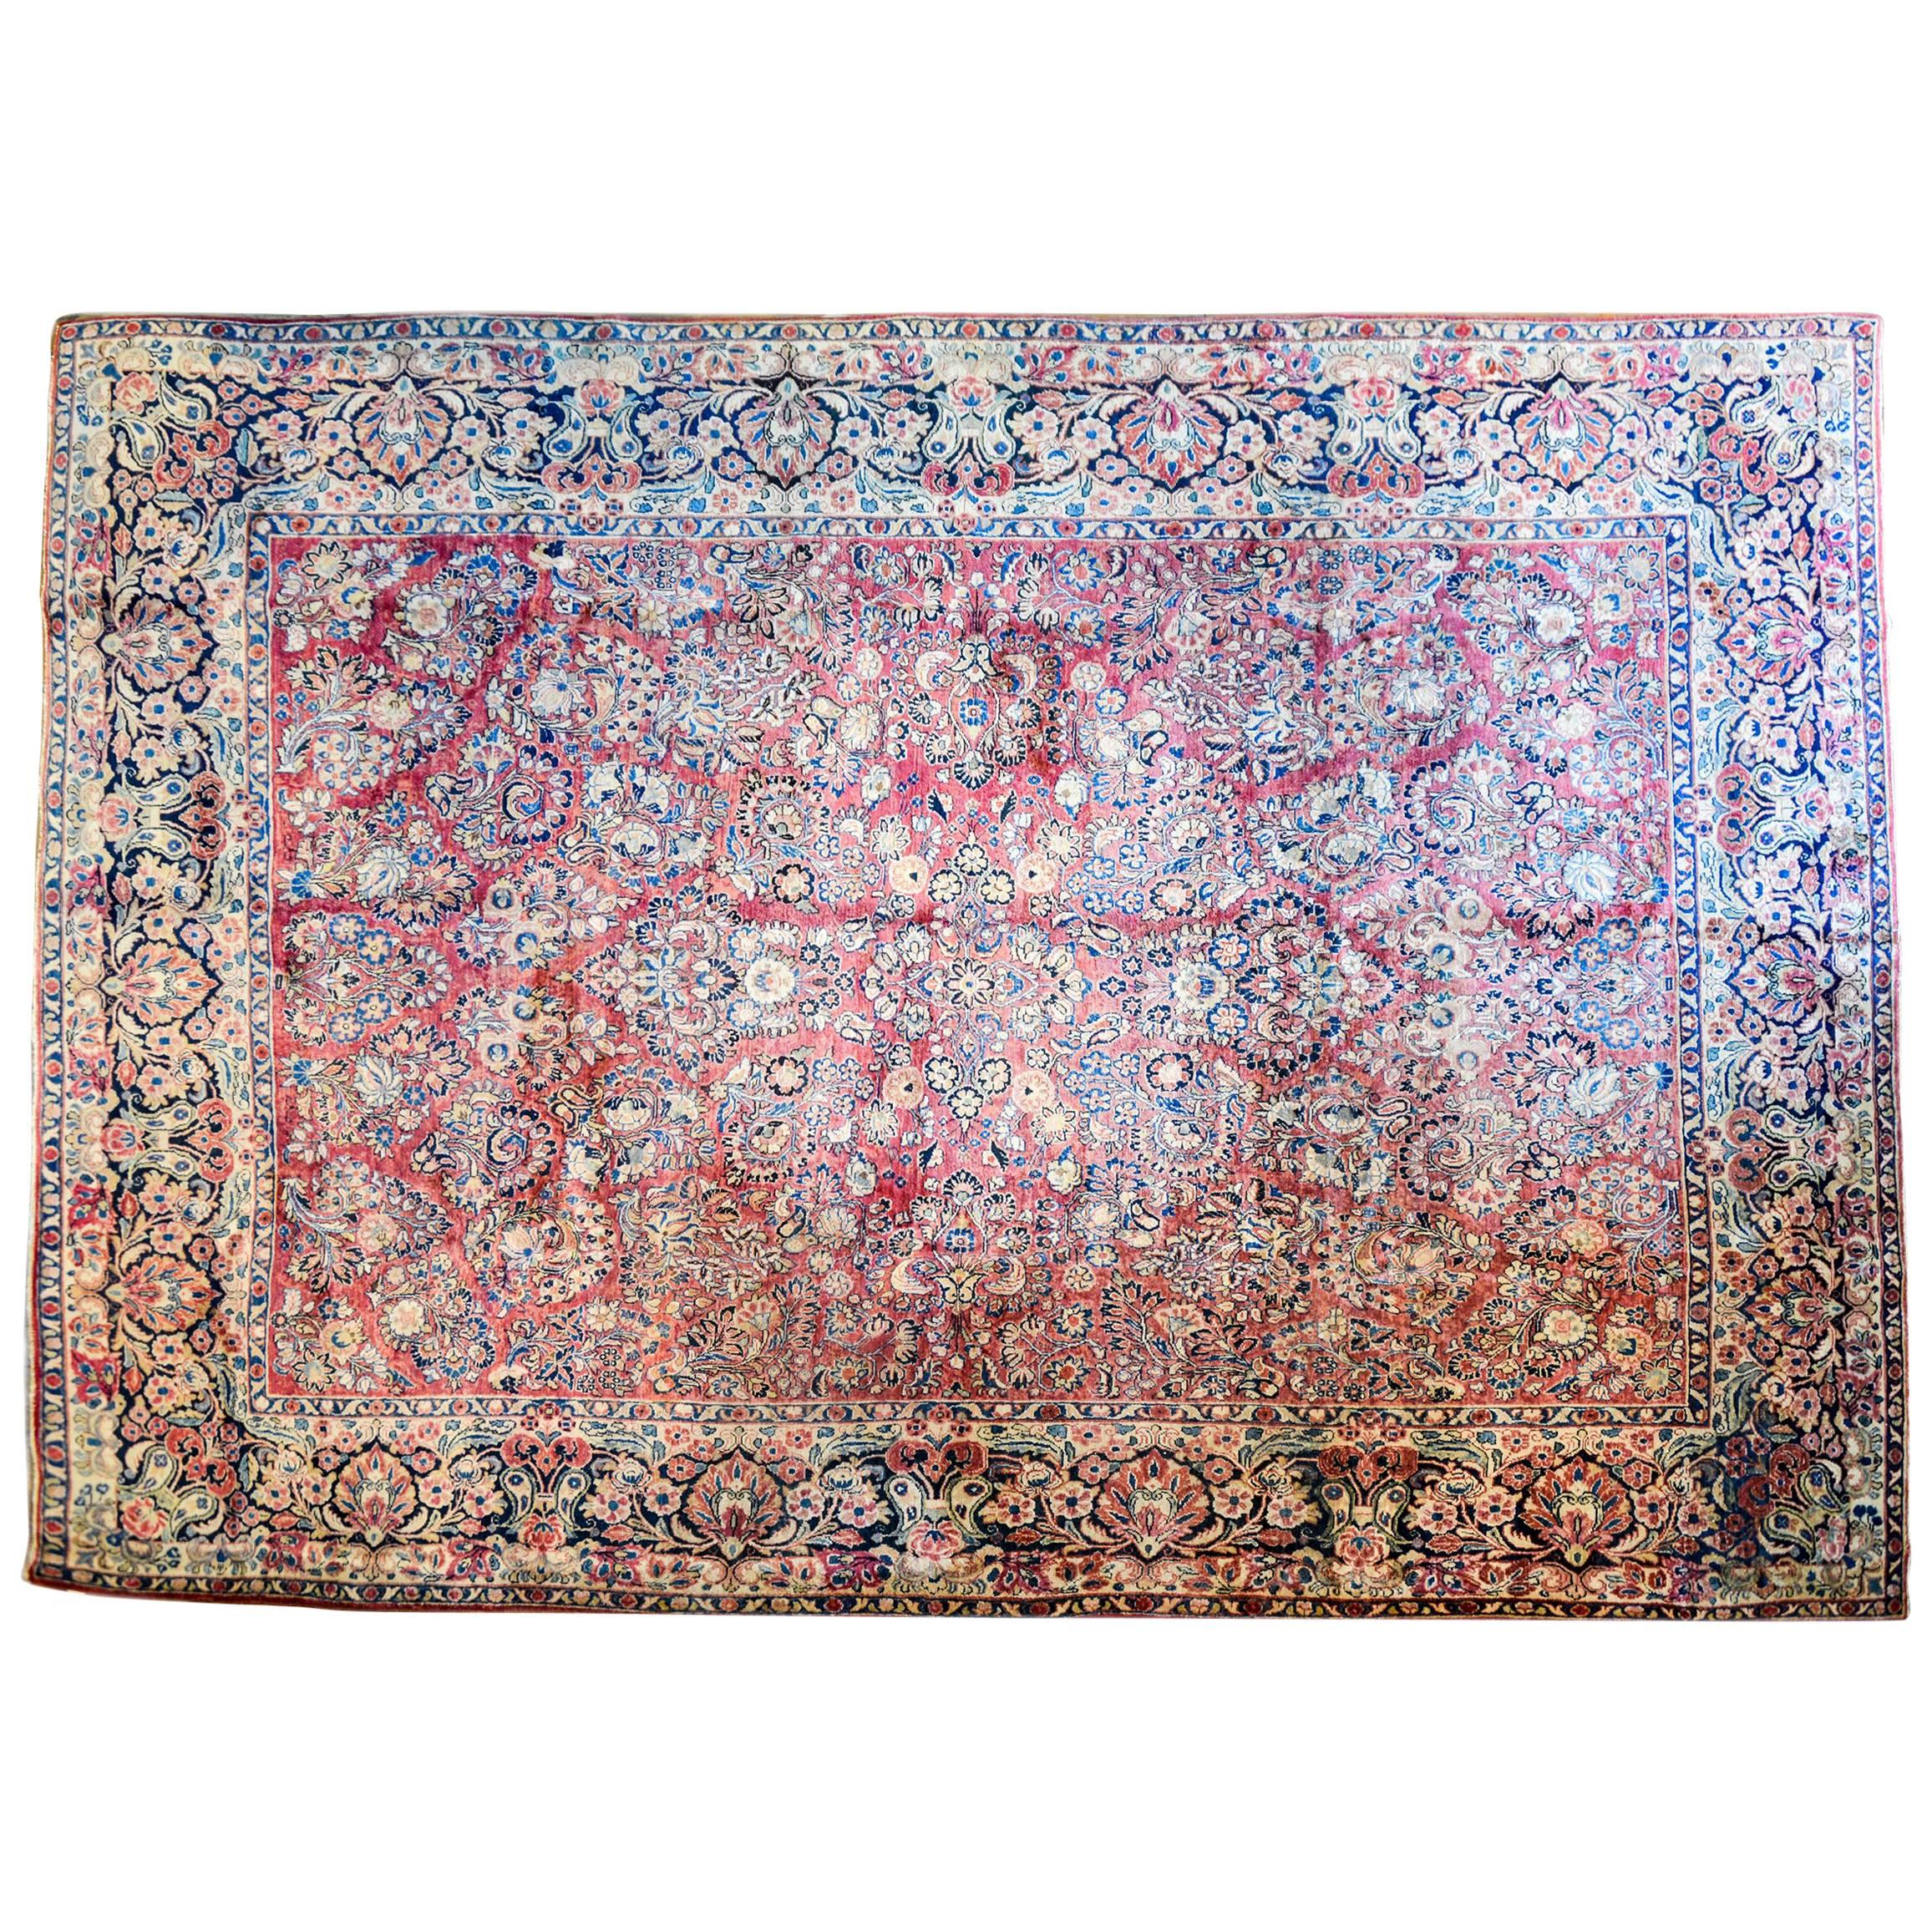 Exceptional Early 20th Century Sarouk Rug